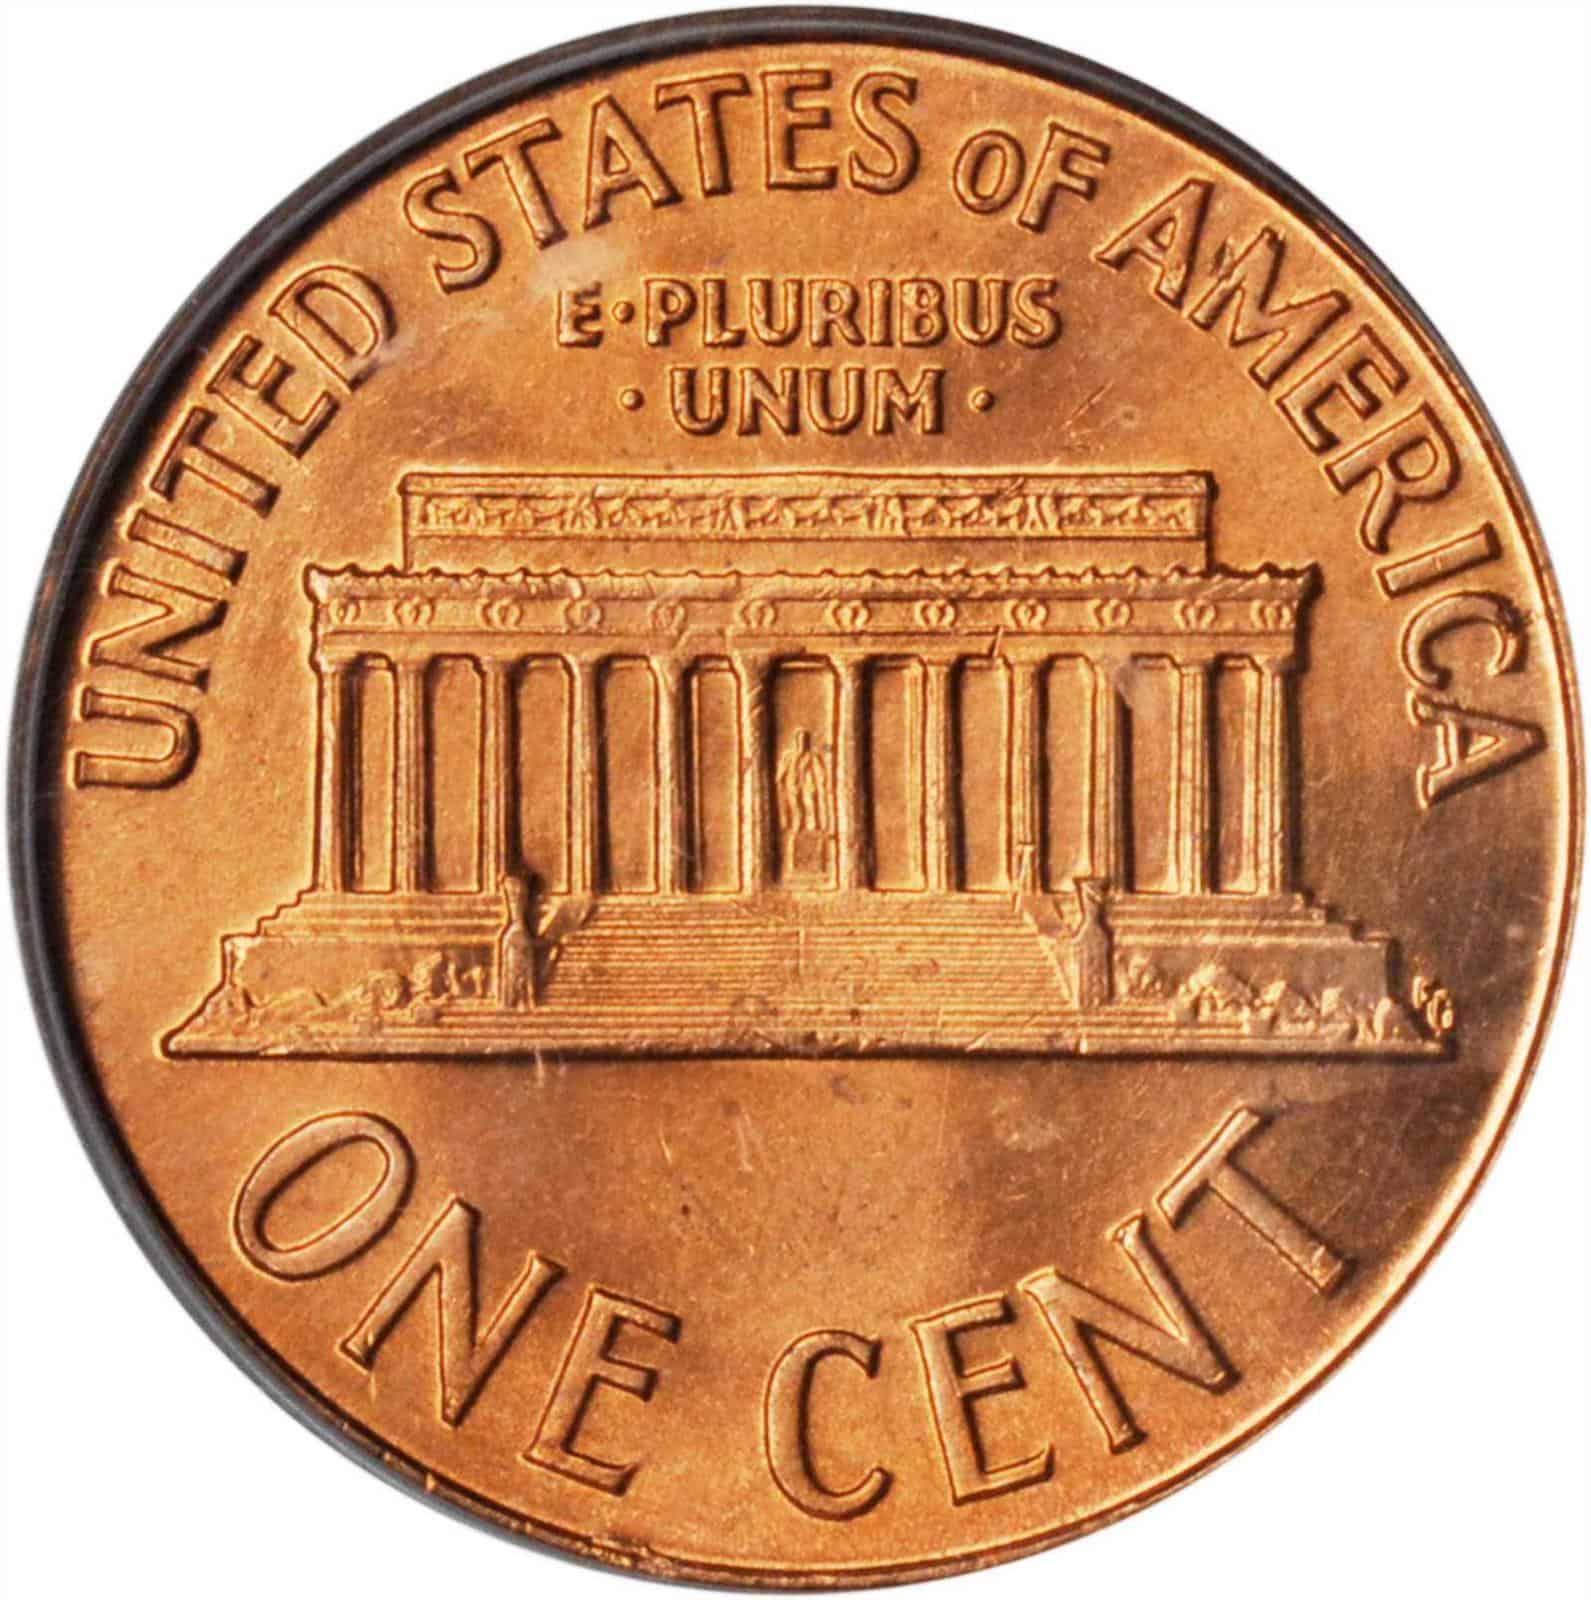 The reverse of the 1960 Lincoln Memorial penny